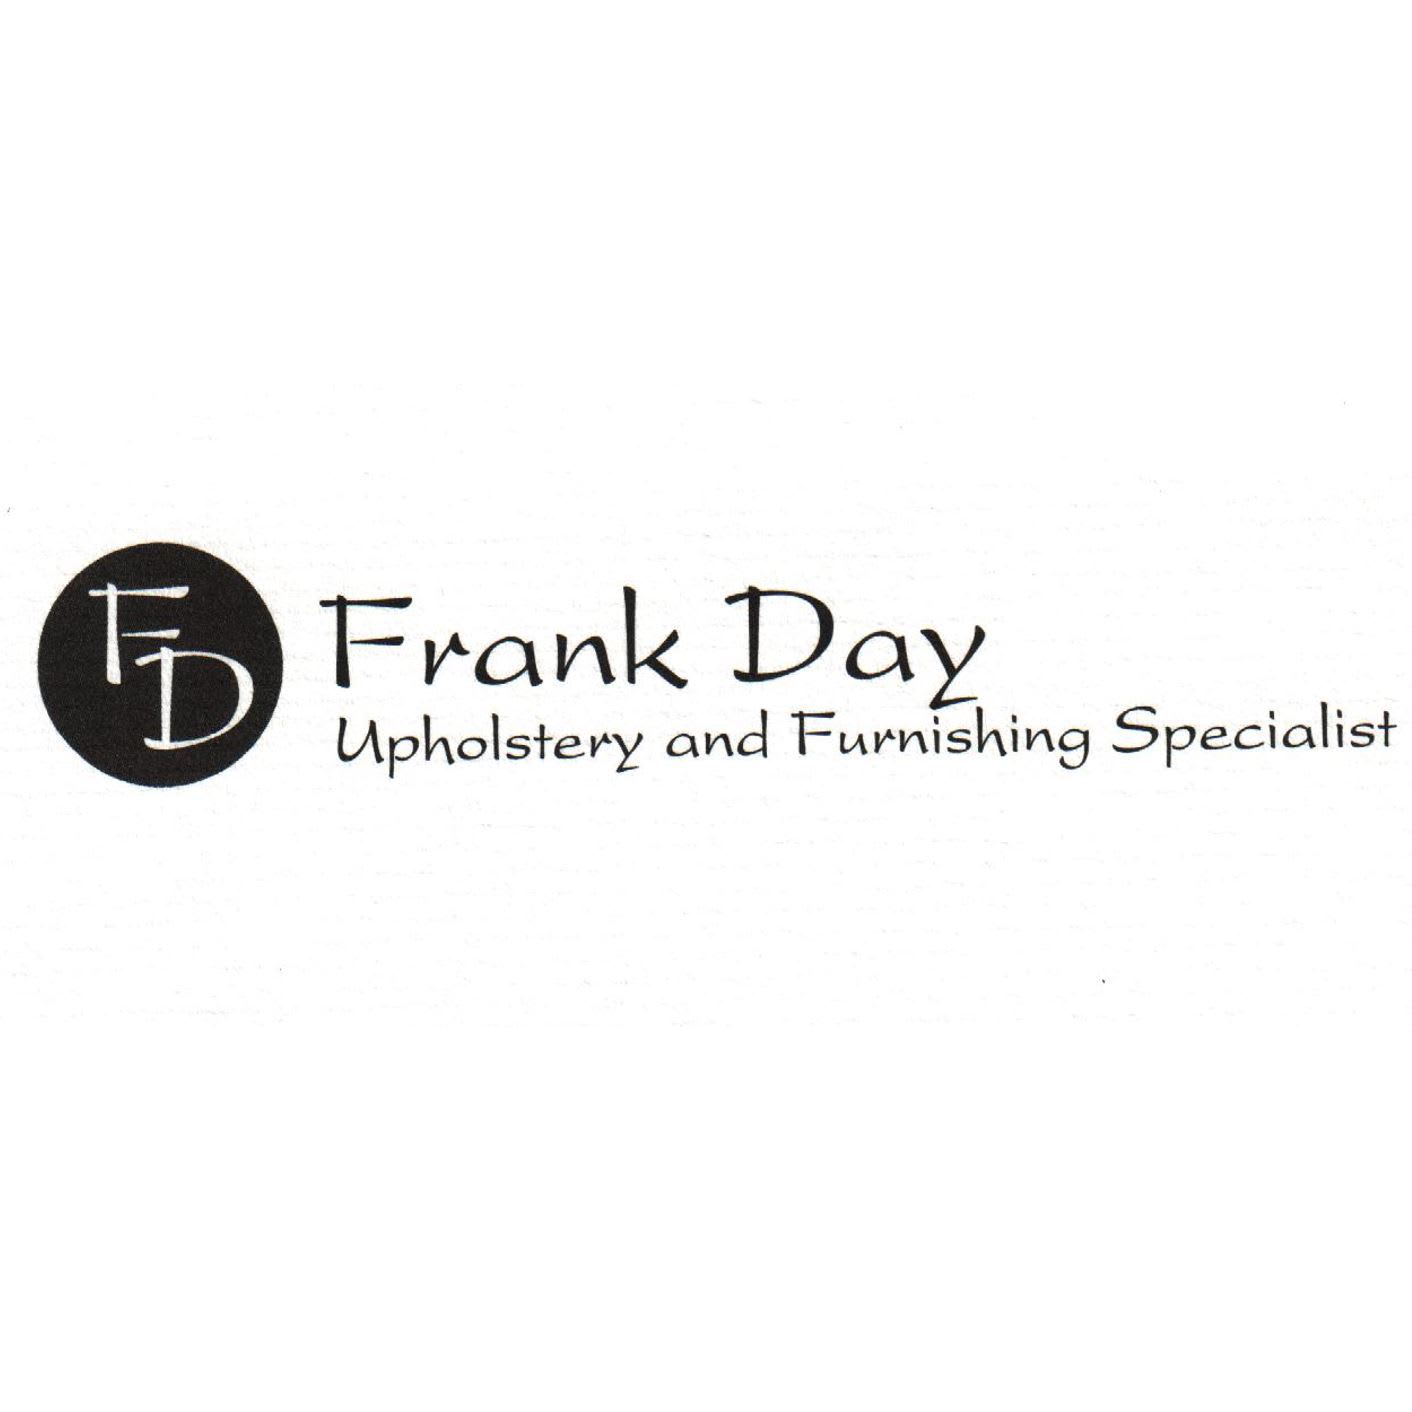 Frank Day Upholstery Ltd - High Wycombe, Buckinghamshire HP11 2RZ - 01494 537338 | ShowMeLocal.com